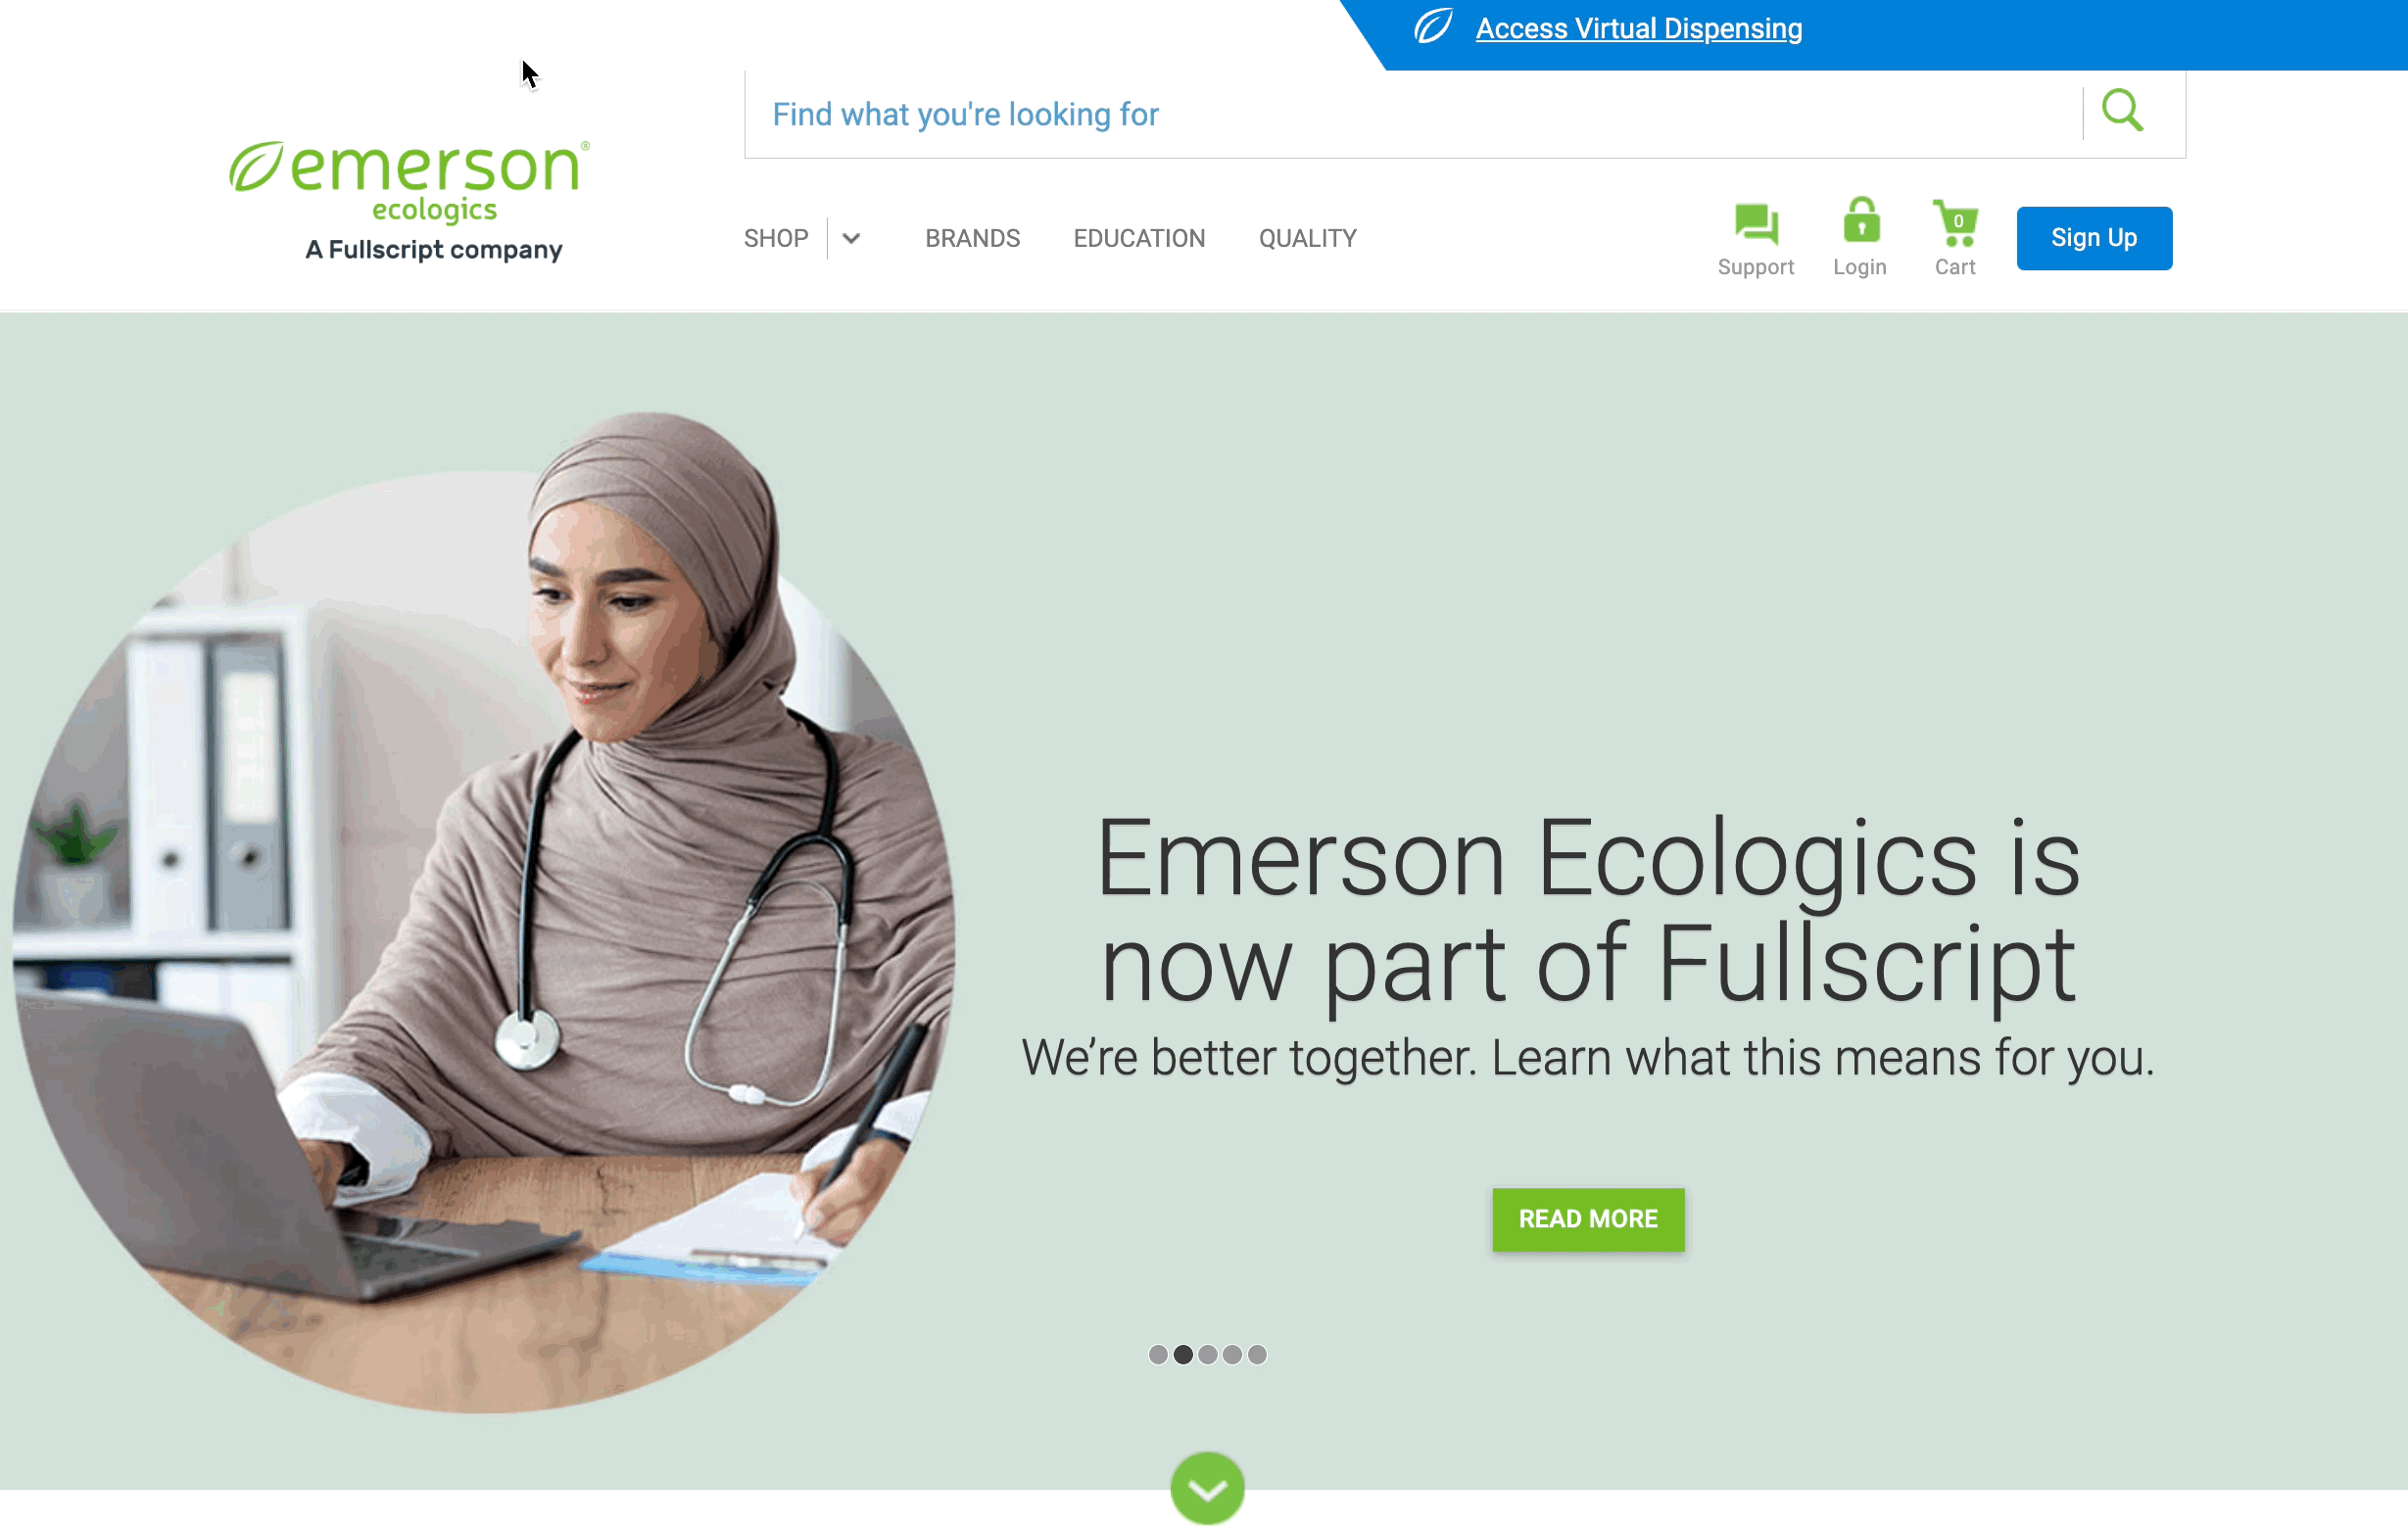 Browsing the emerson catalog.